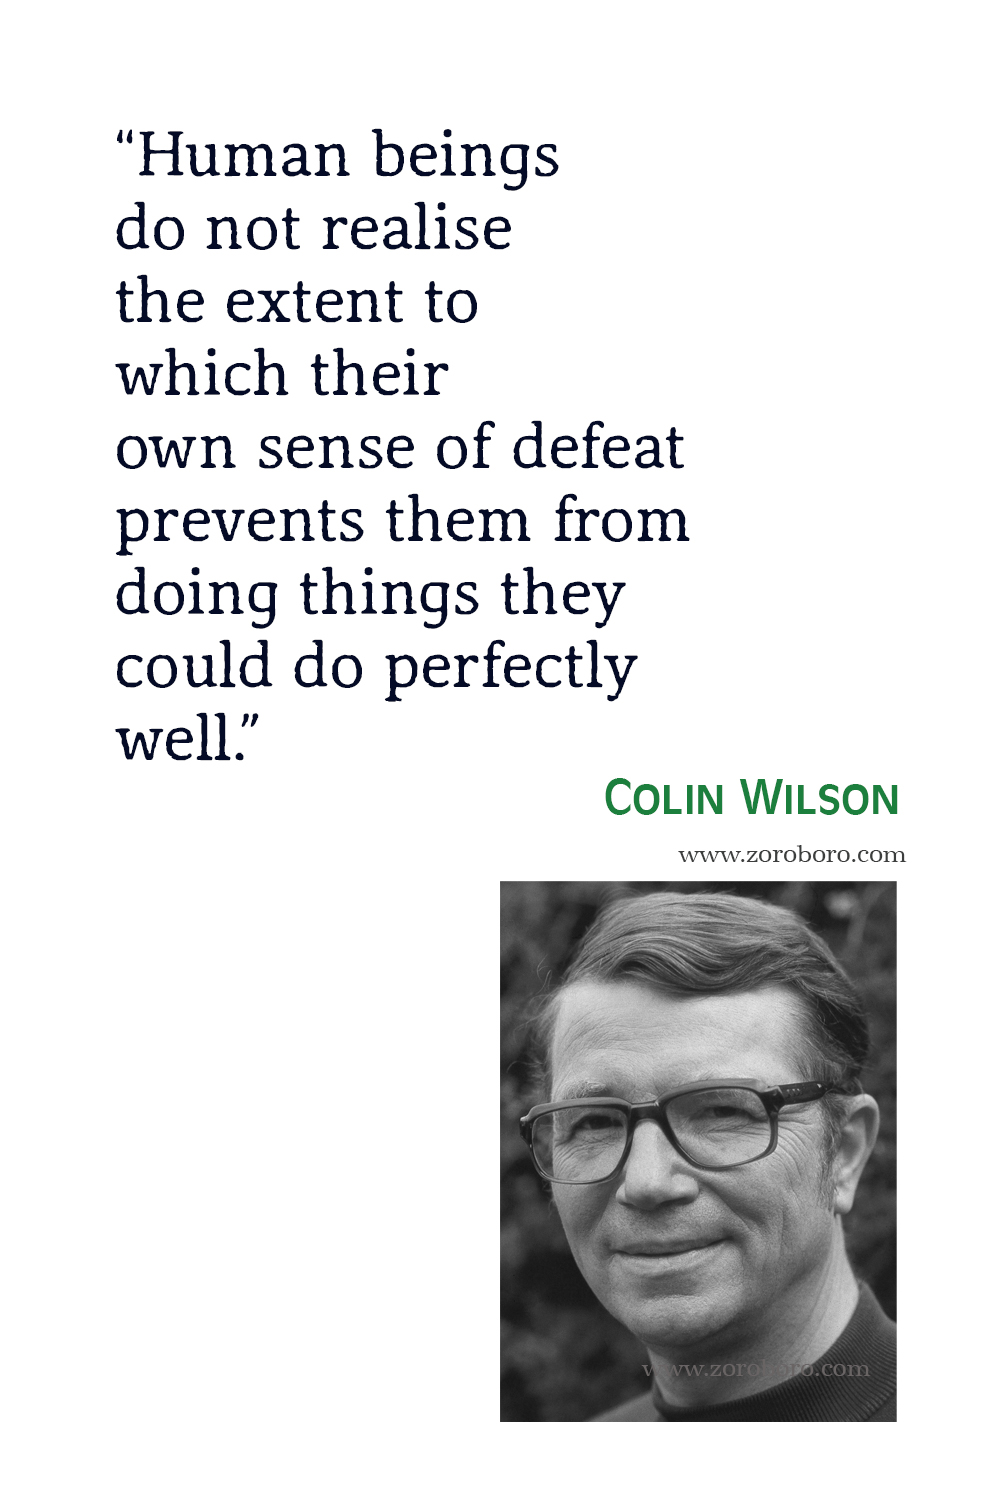 Colin Wilson Quotes, The Outsider Quotes, Colin Wilson The Mind Parasites Quotes, Colin Wilson, Colin Wilson The Occult Quotes.